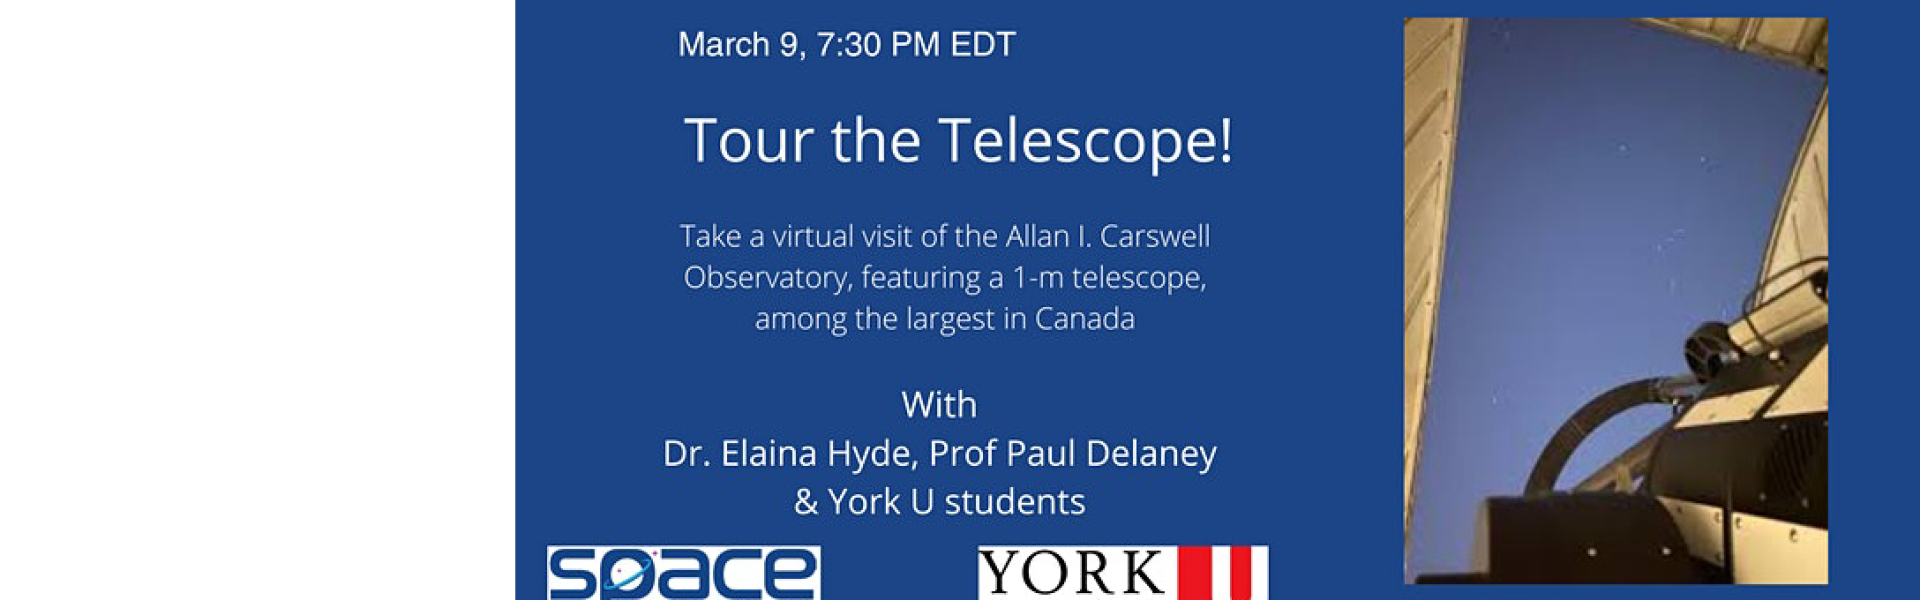 Tour of Allan Carswell Observatory